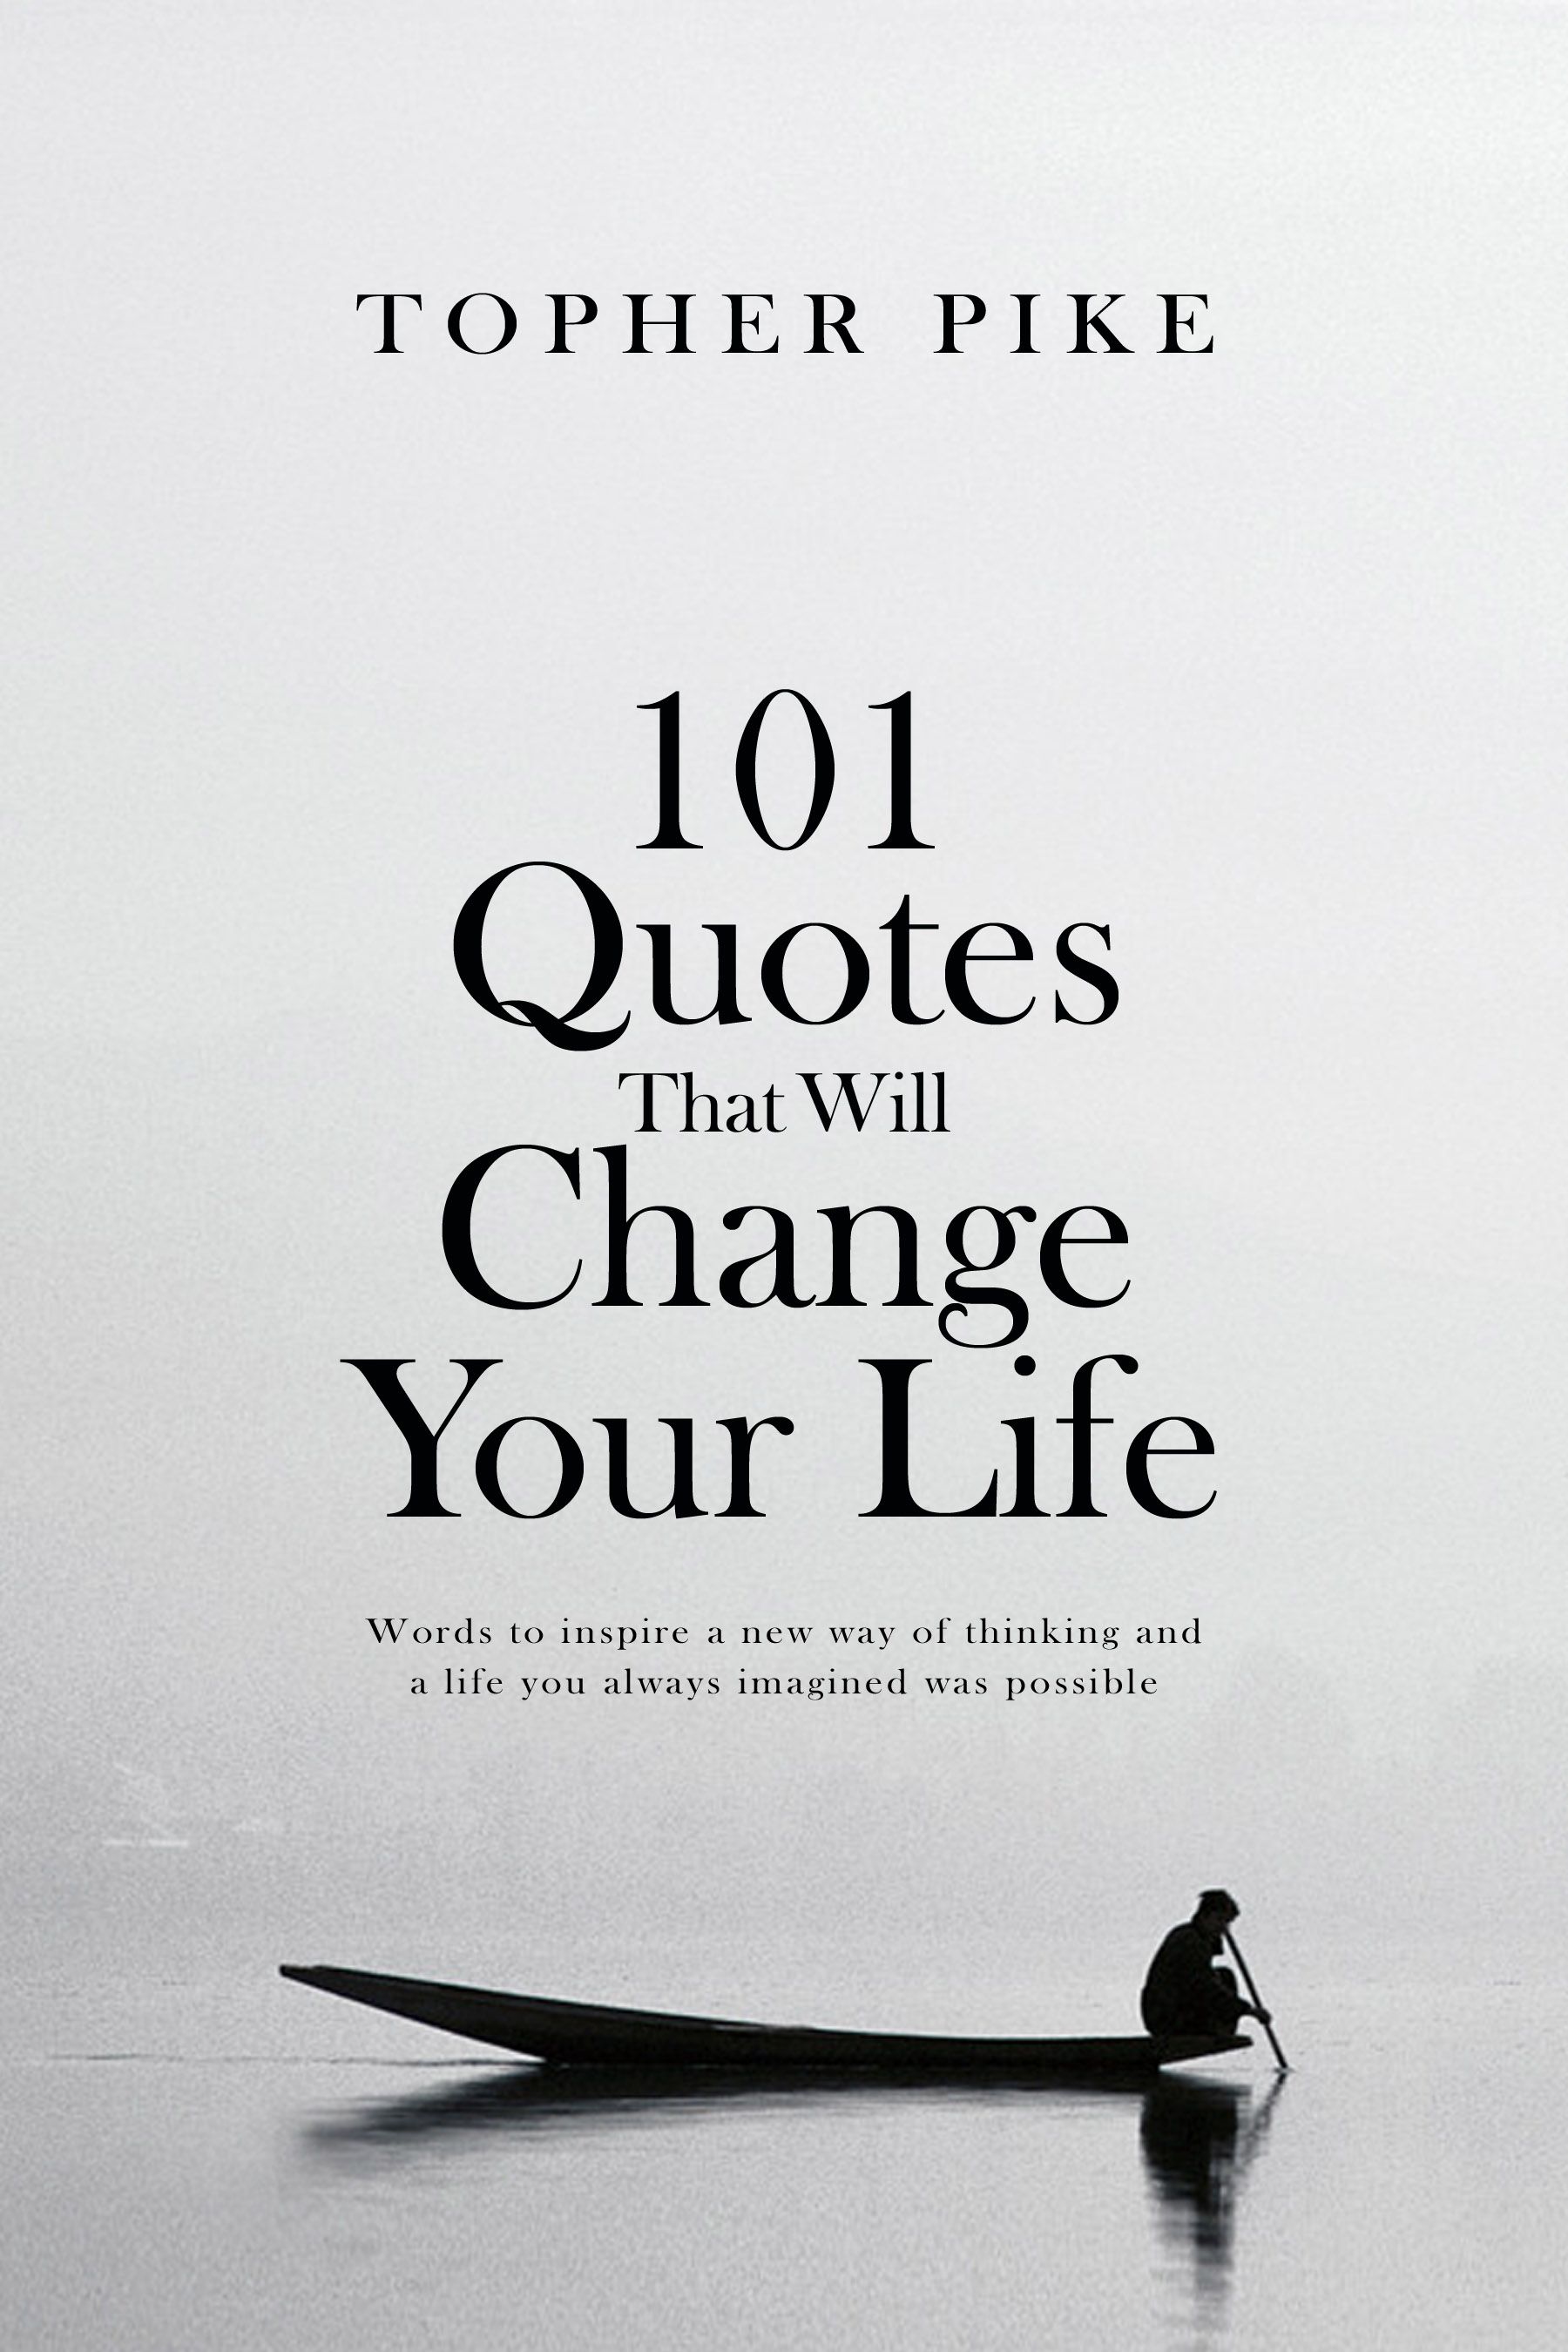 FREE: 101 Quotes That Will Change Your Life by Topher Pike